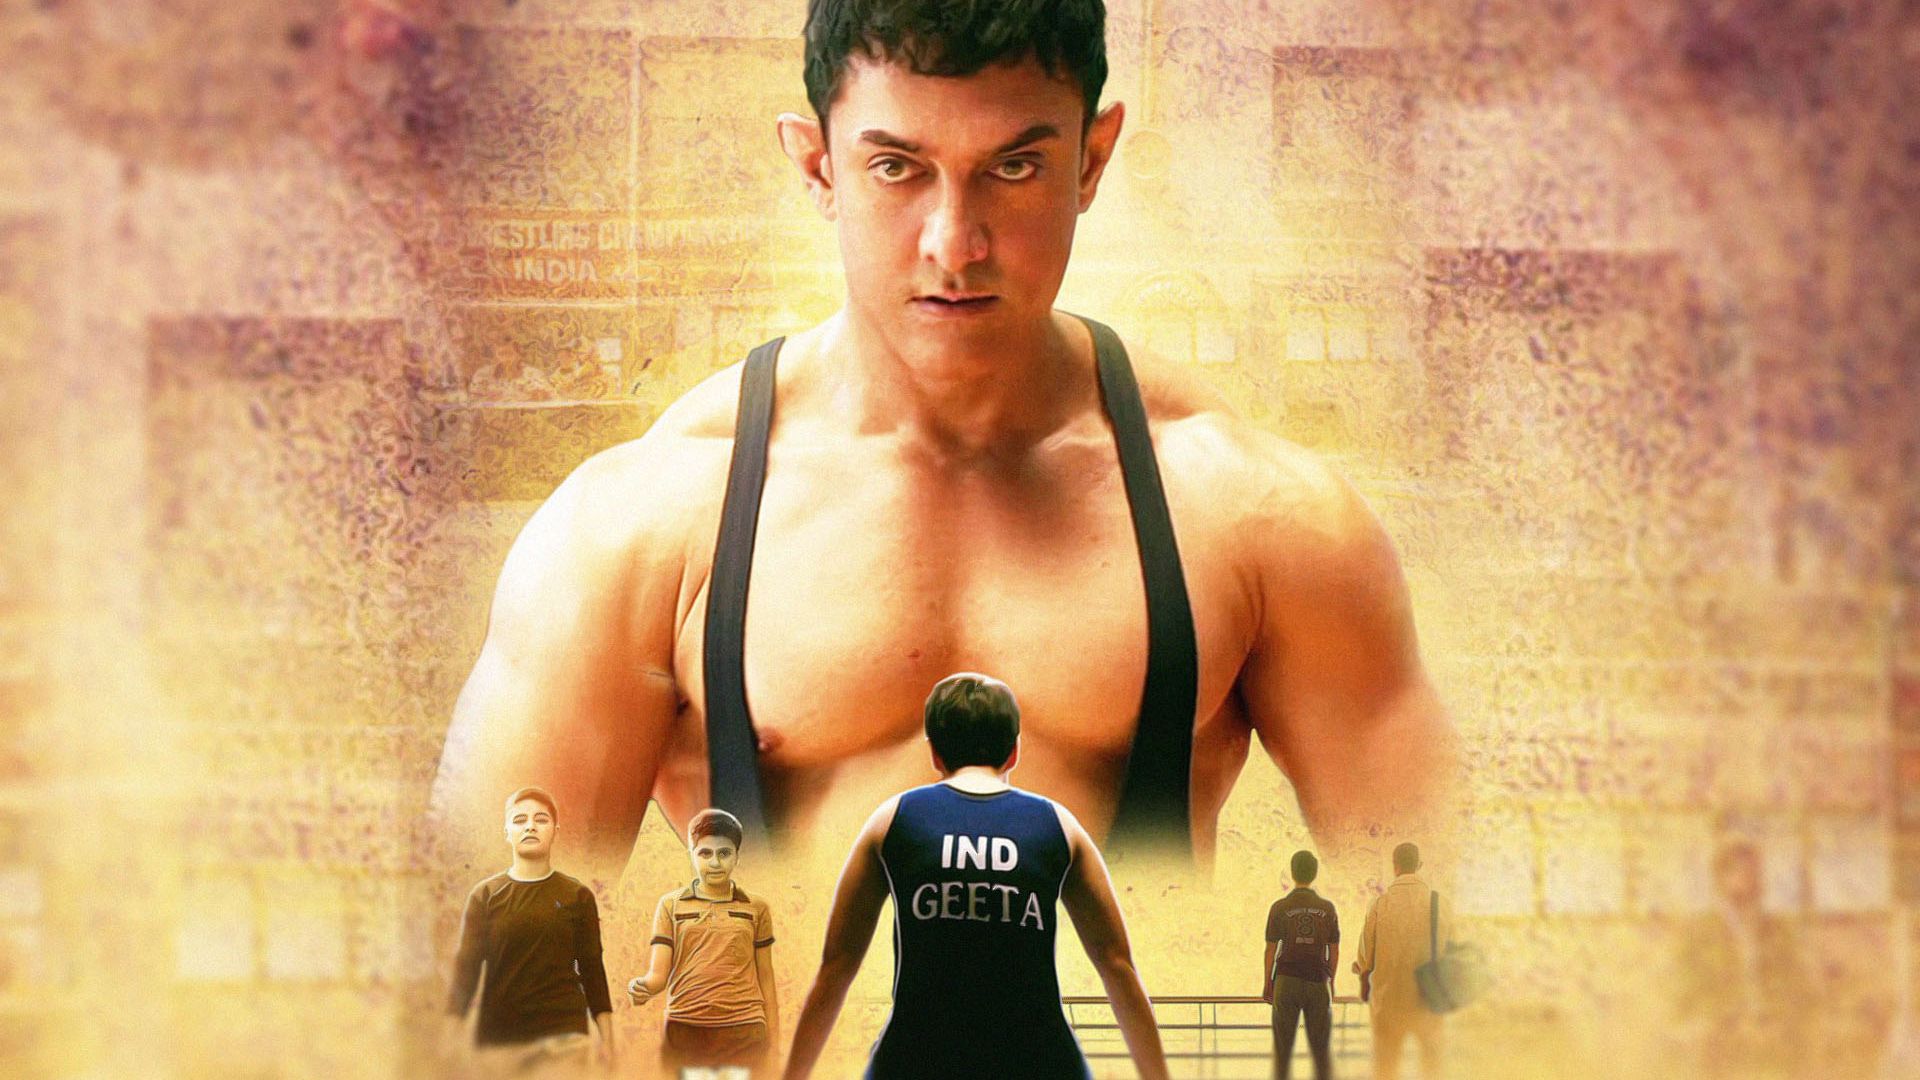 Desktop Wallpaper Dangal 2016 Bollywood Movie, Hd Image, Picture, Background,  P6xqog